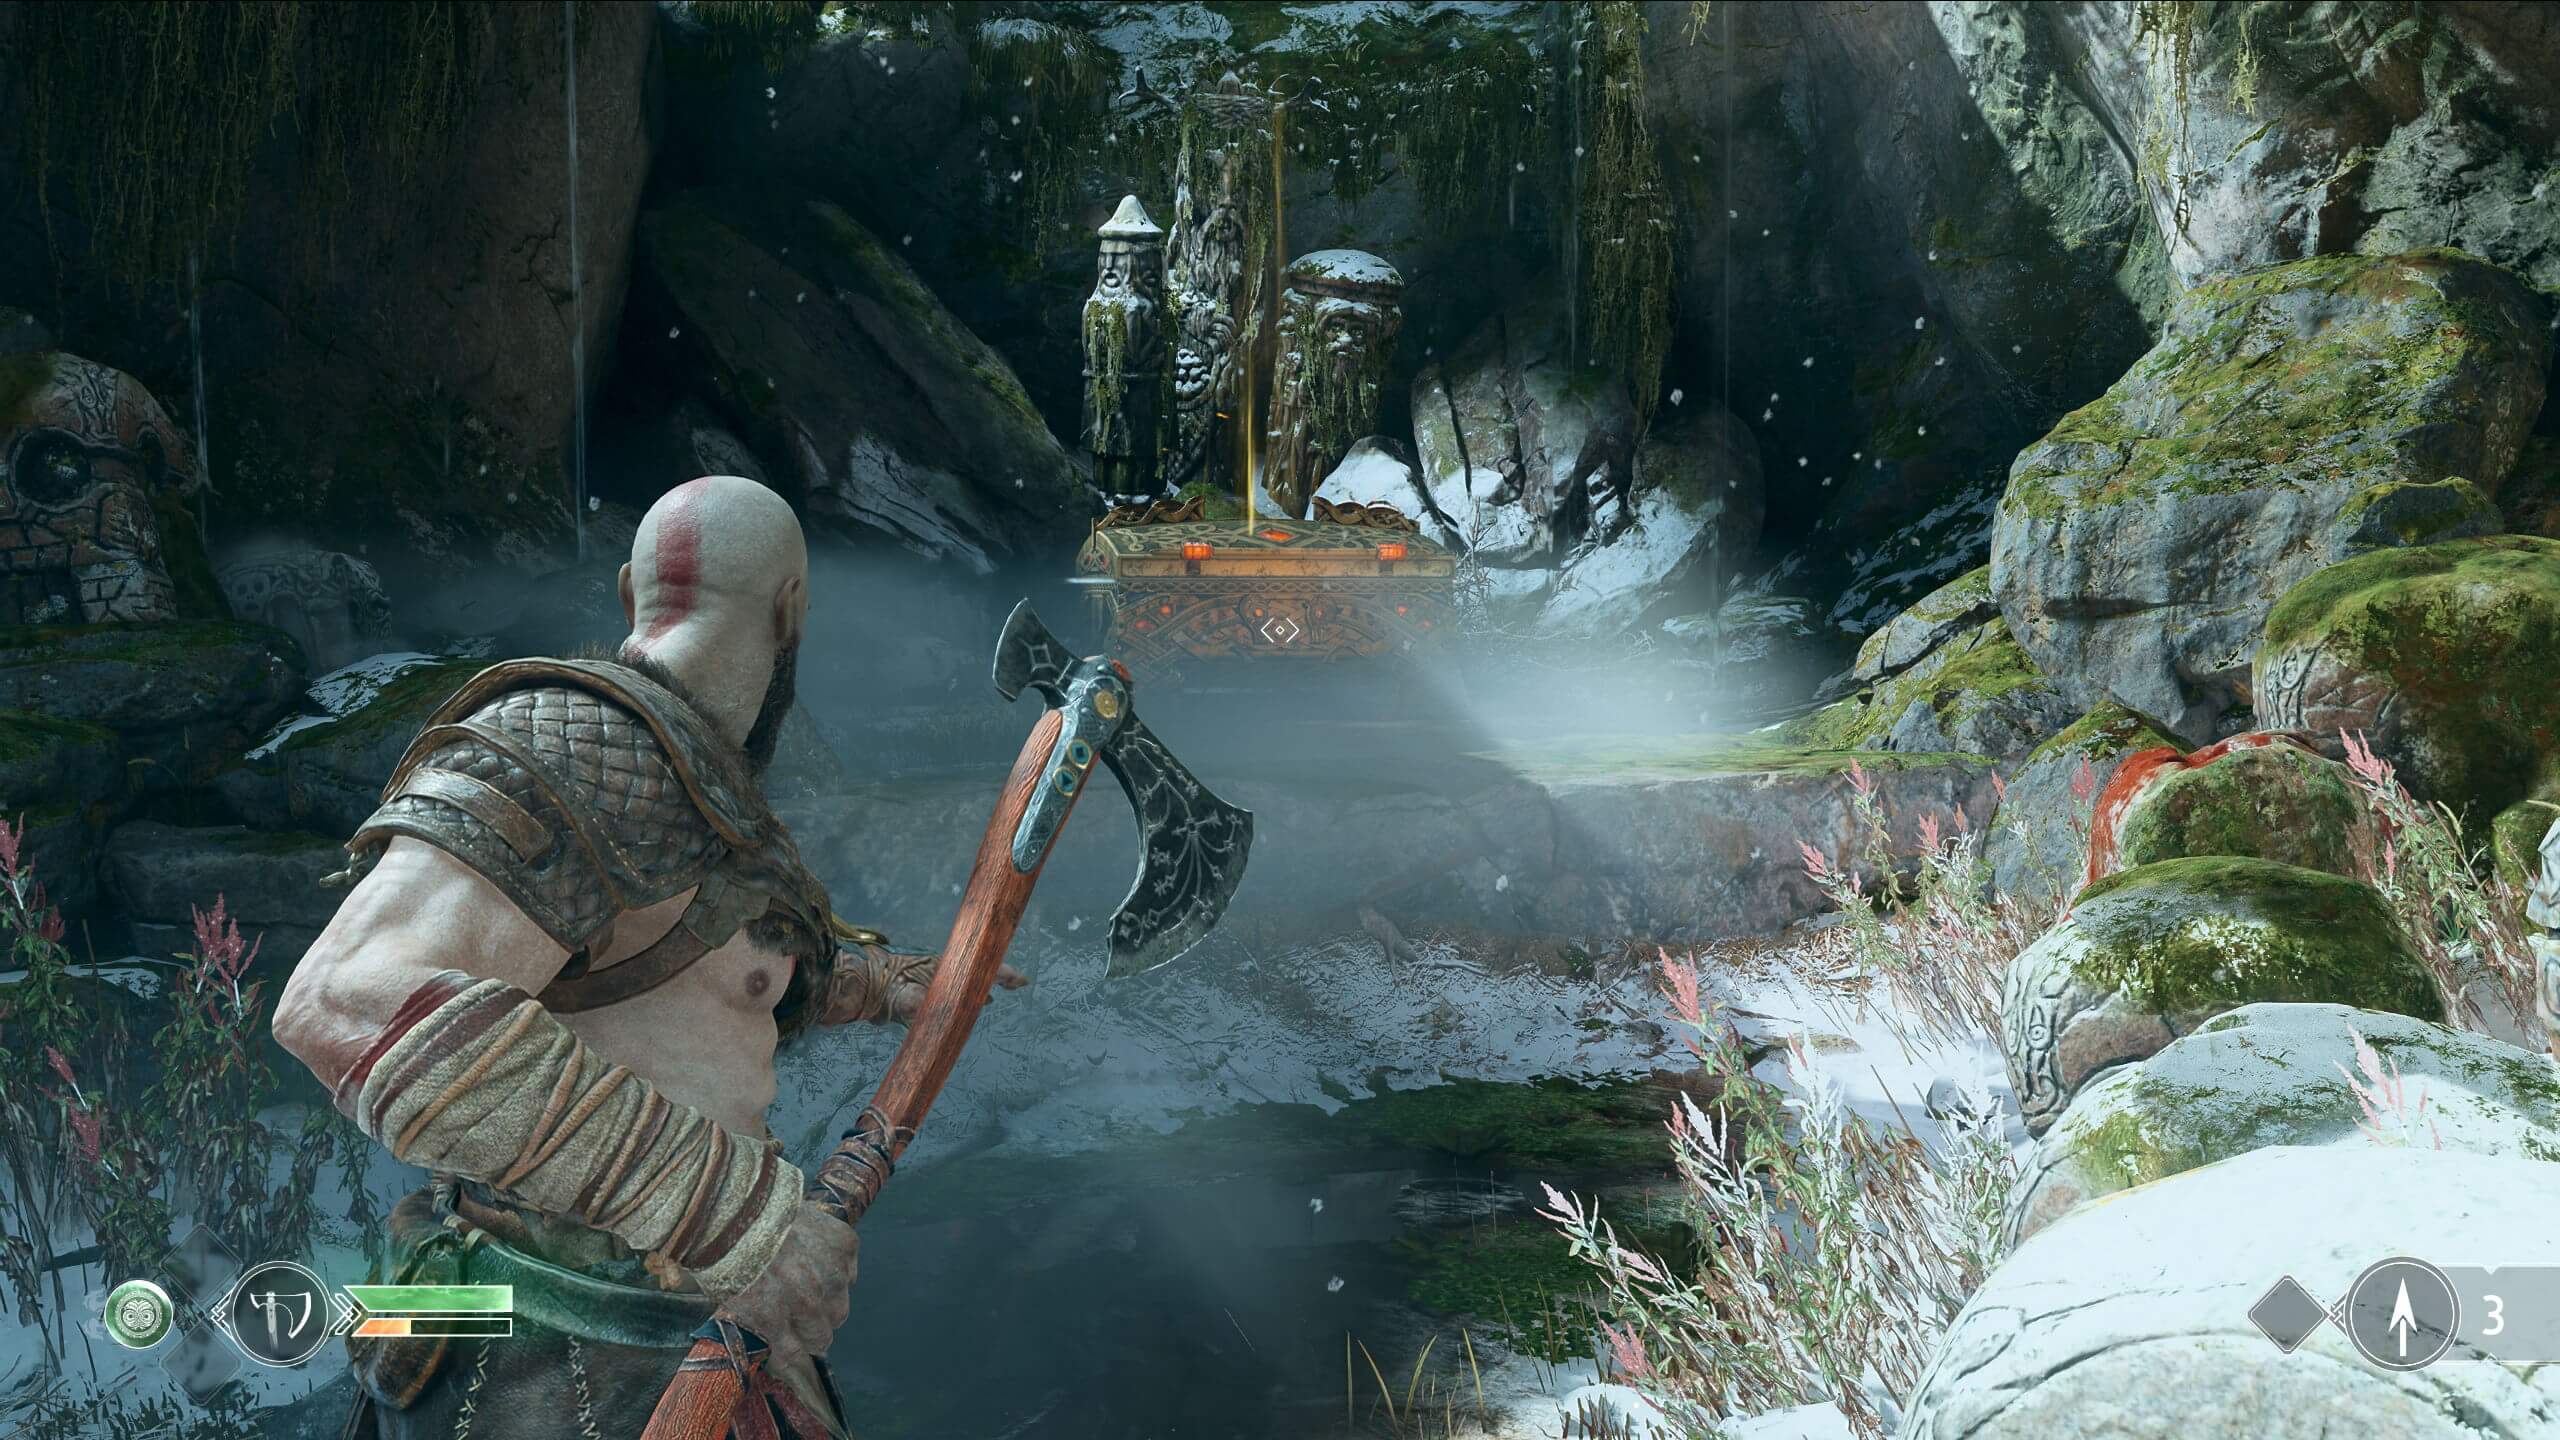 might as well get in on this Ragnarok ultrawide wallpaper action myself.  Have at my efforts. : r/GodofWar